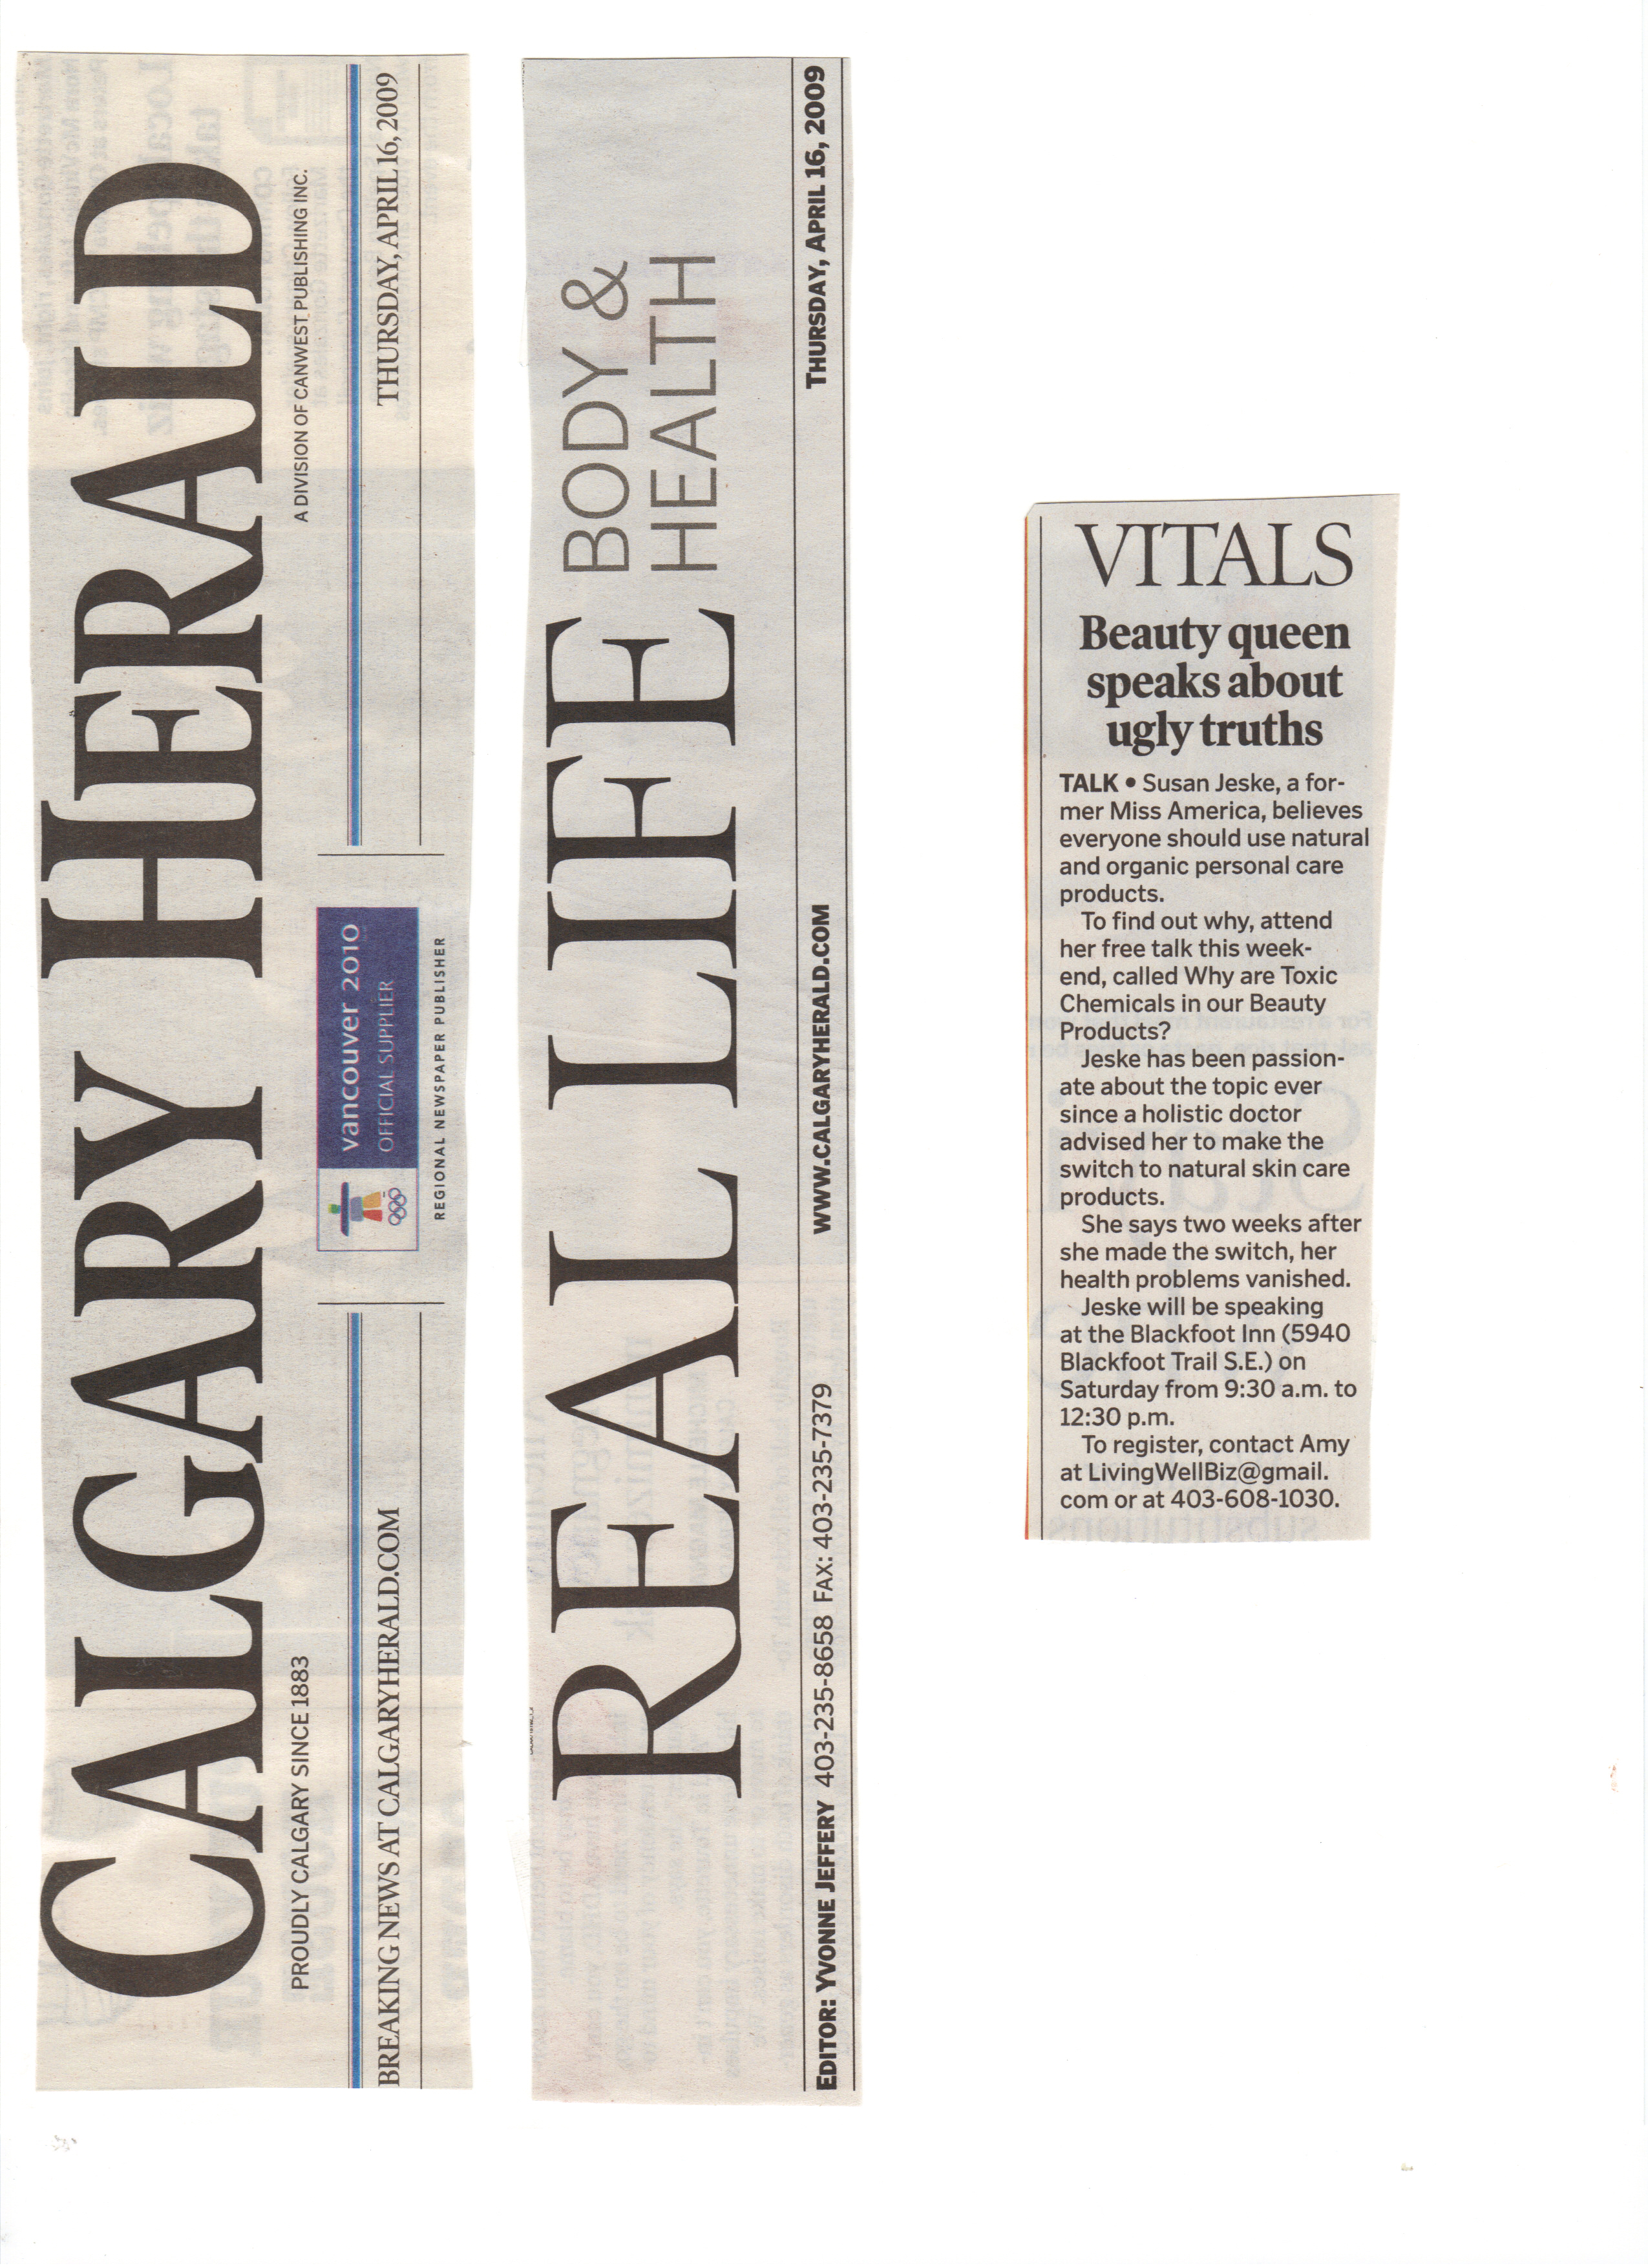 Calgary Herald - Front page of Real Life Body & Health Section